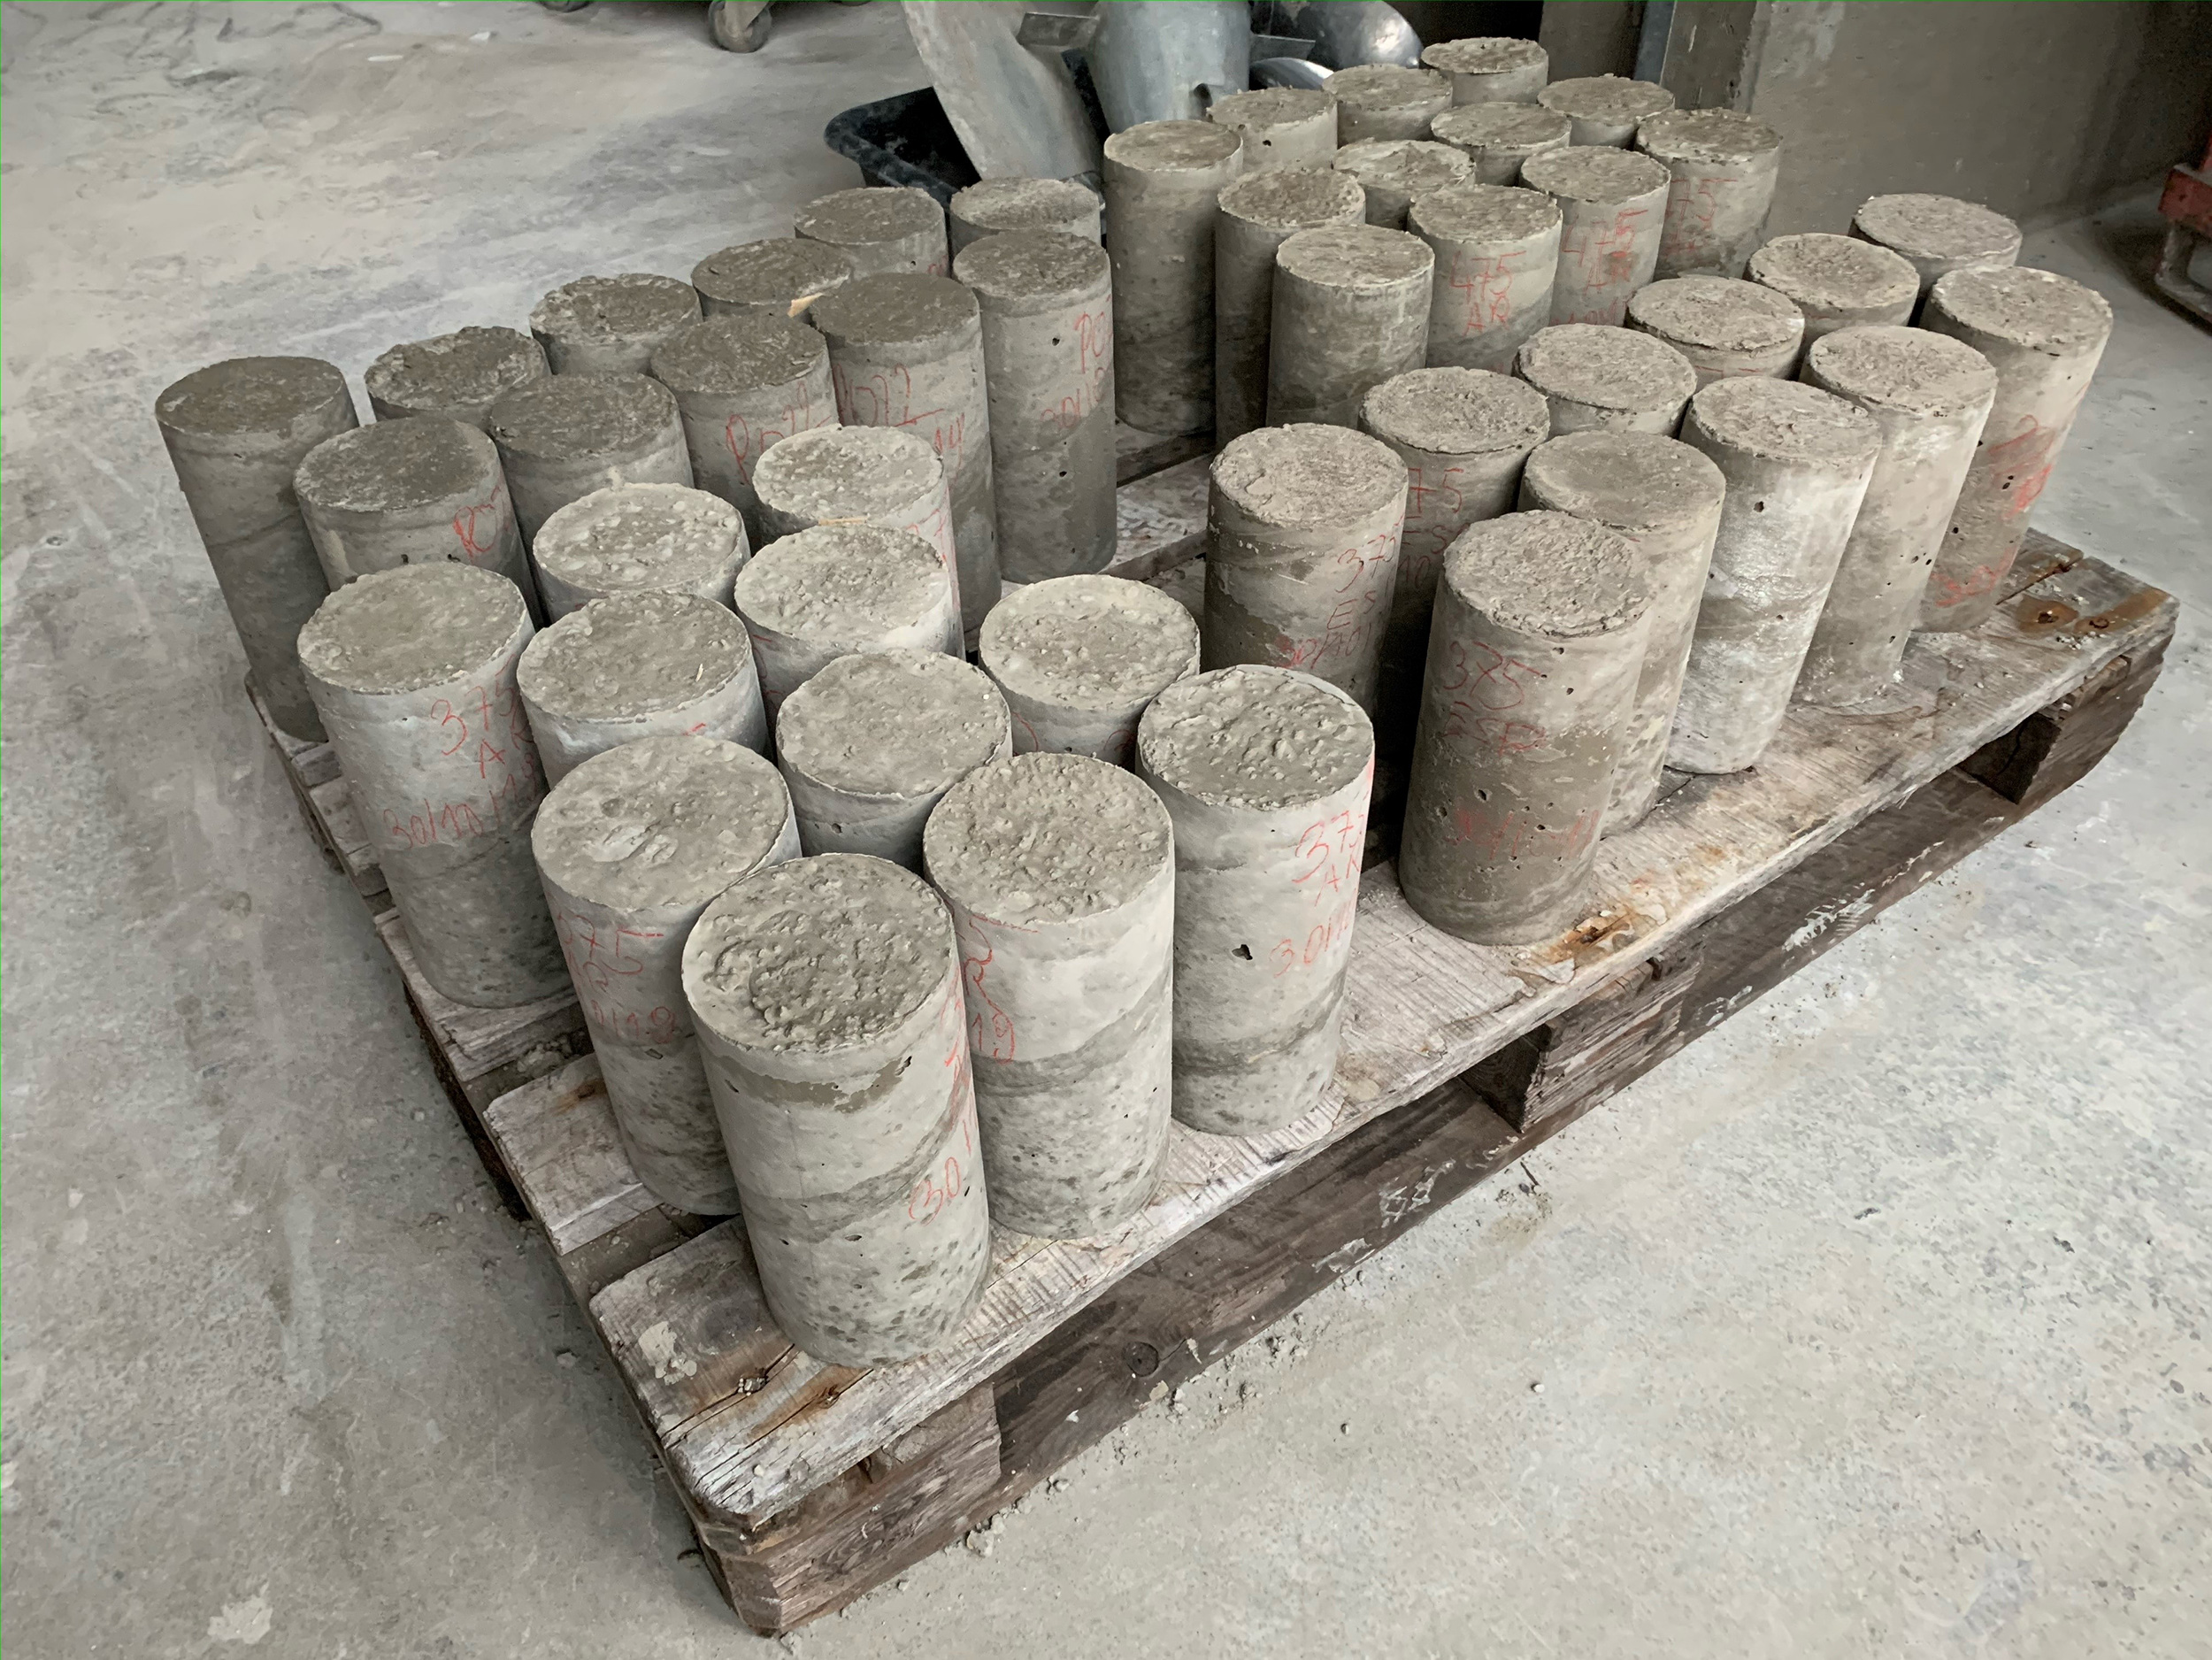 Enlarged view: Finished cylindrical concrete blocks on a pallet